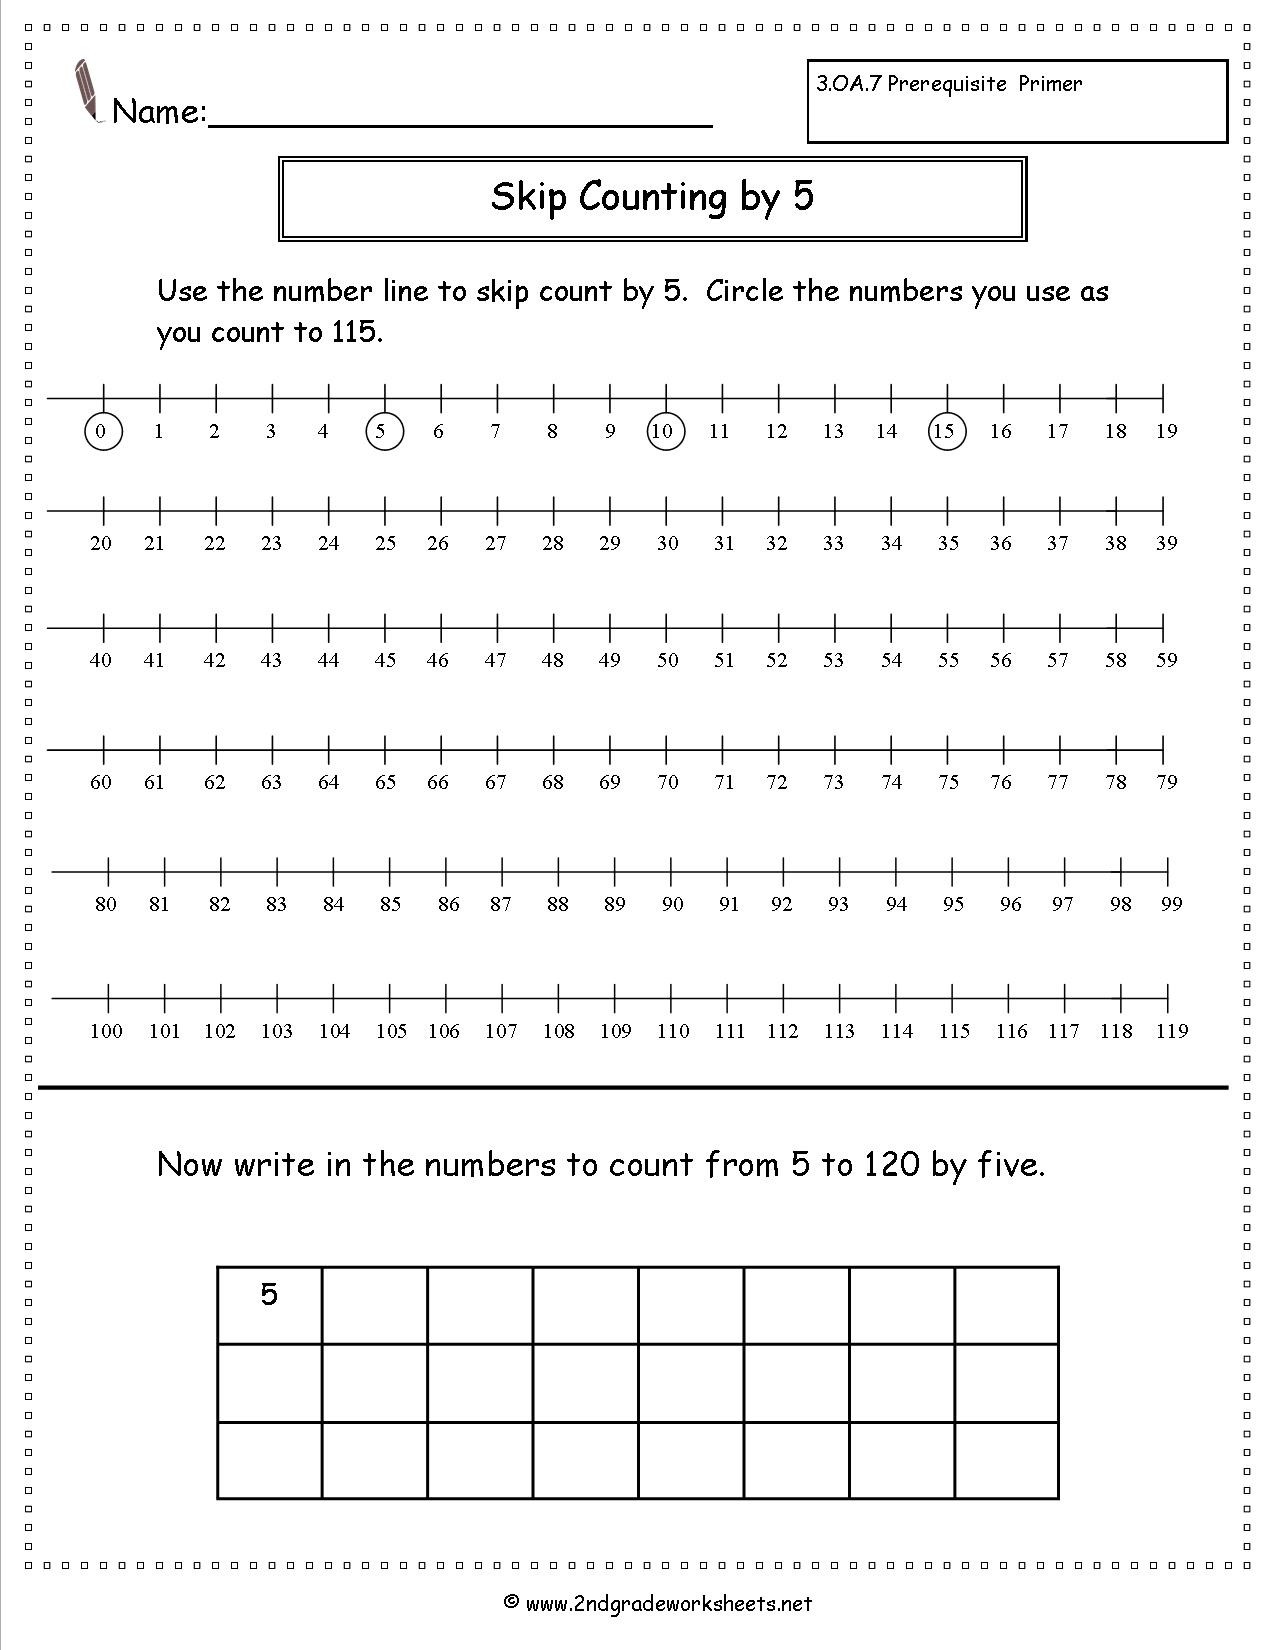 Counting by 5s Worksheet Skip Counting by 5s and 10s Worksheet